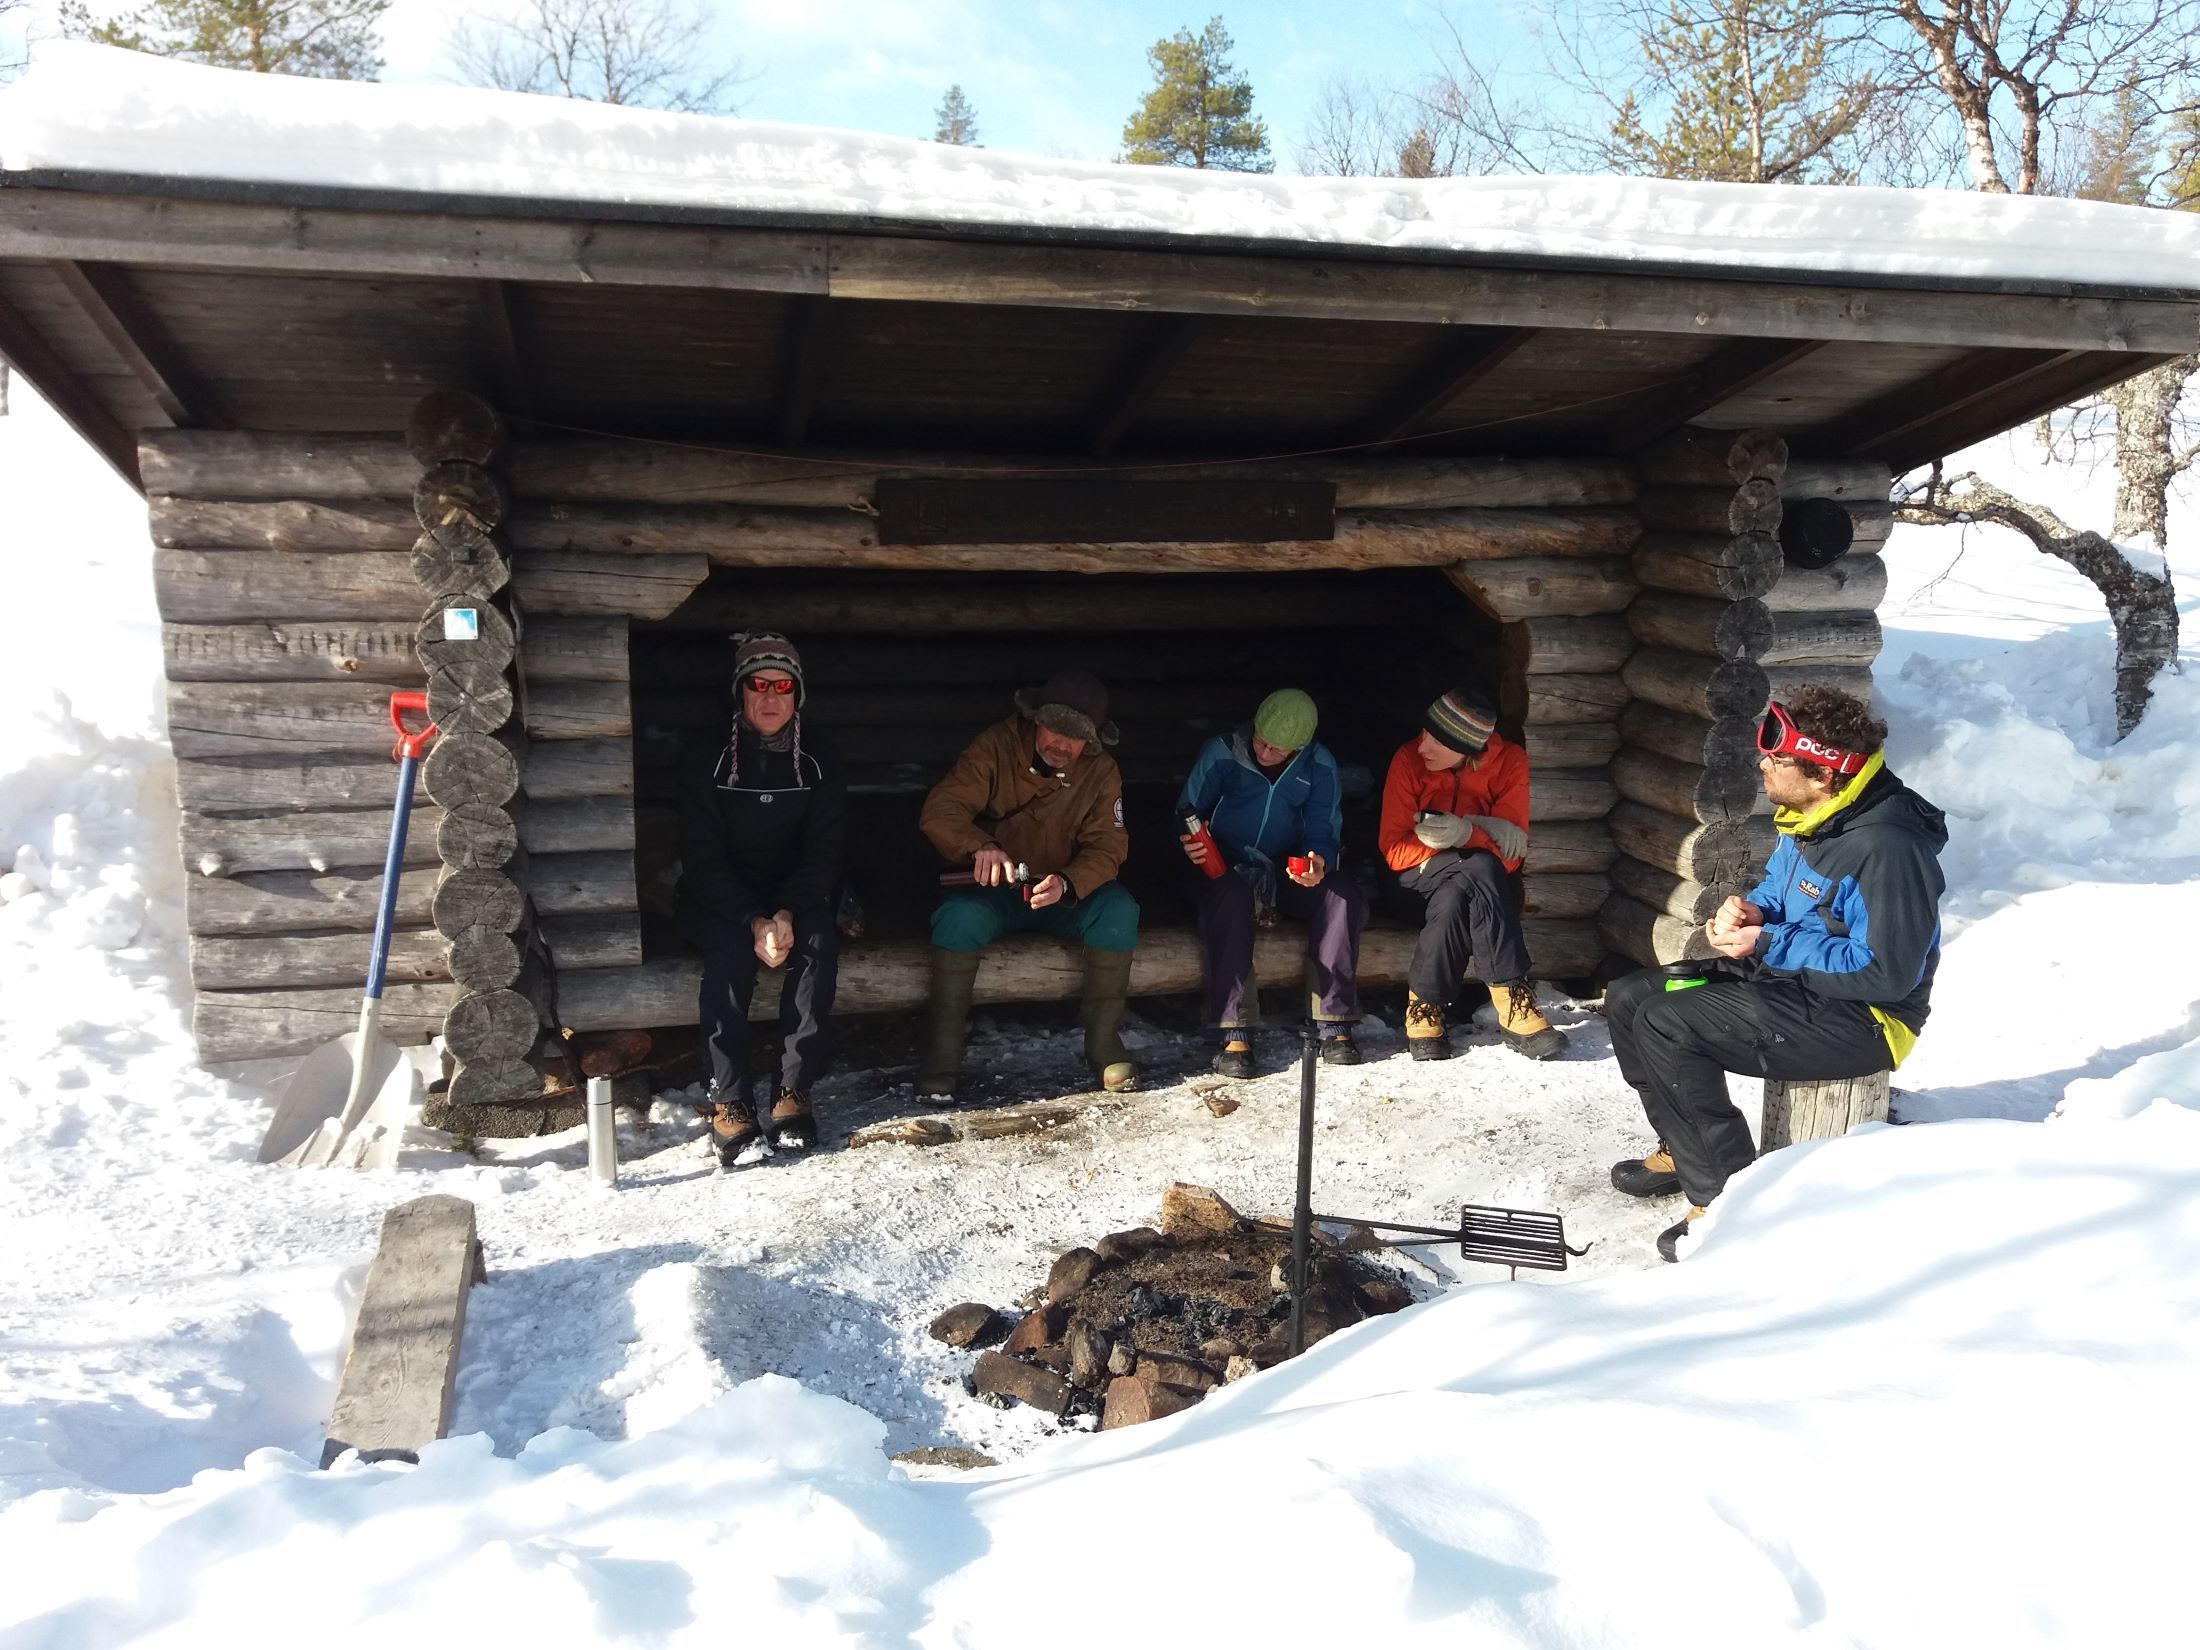 A group of skiers having lunch on a lean-to-shelter